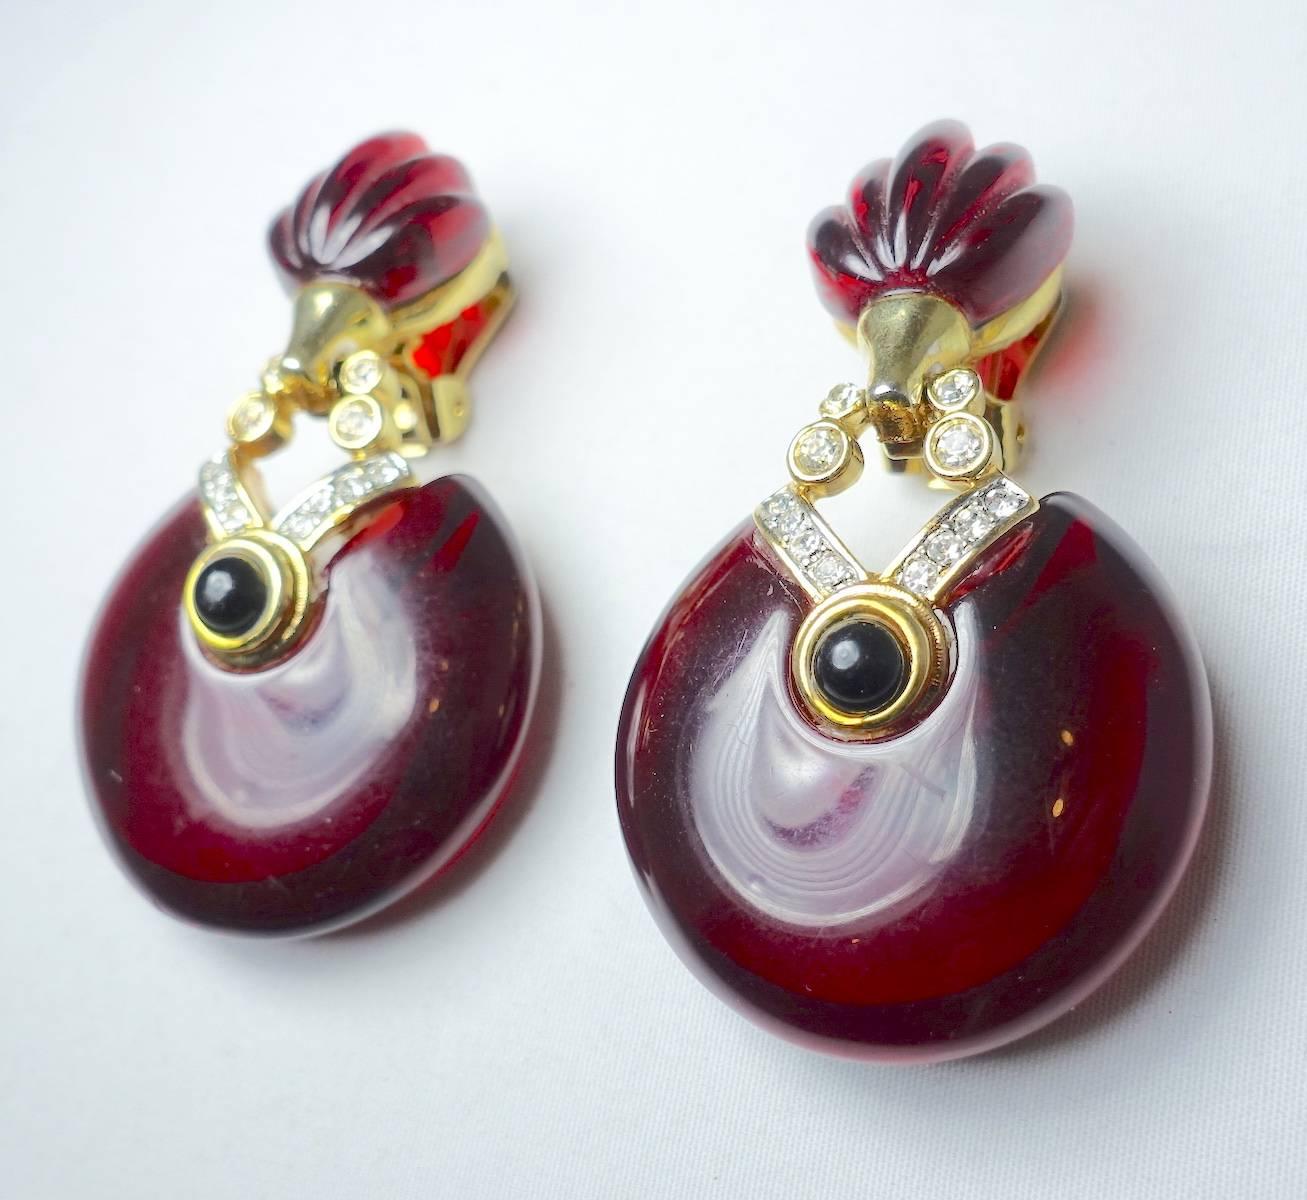 These vintage 1980s French earrings feature a cranberry color resin with clear crystal accents and a round black crystal in the center.  These clip earrings are made in a gold tone setting and measure 2-1/2” x 1-1/4” and are in excellent condition.